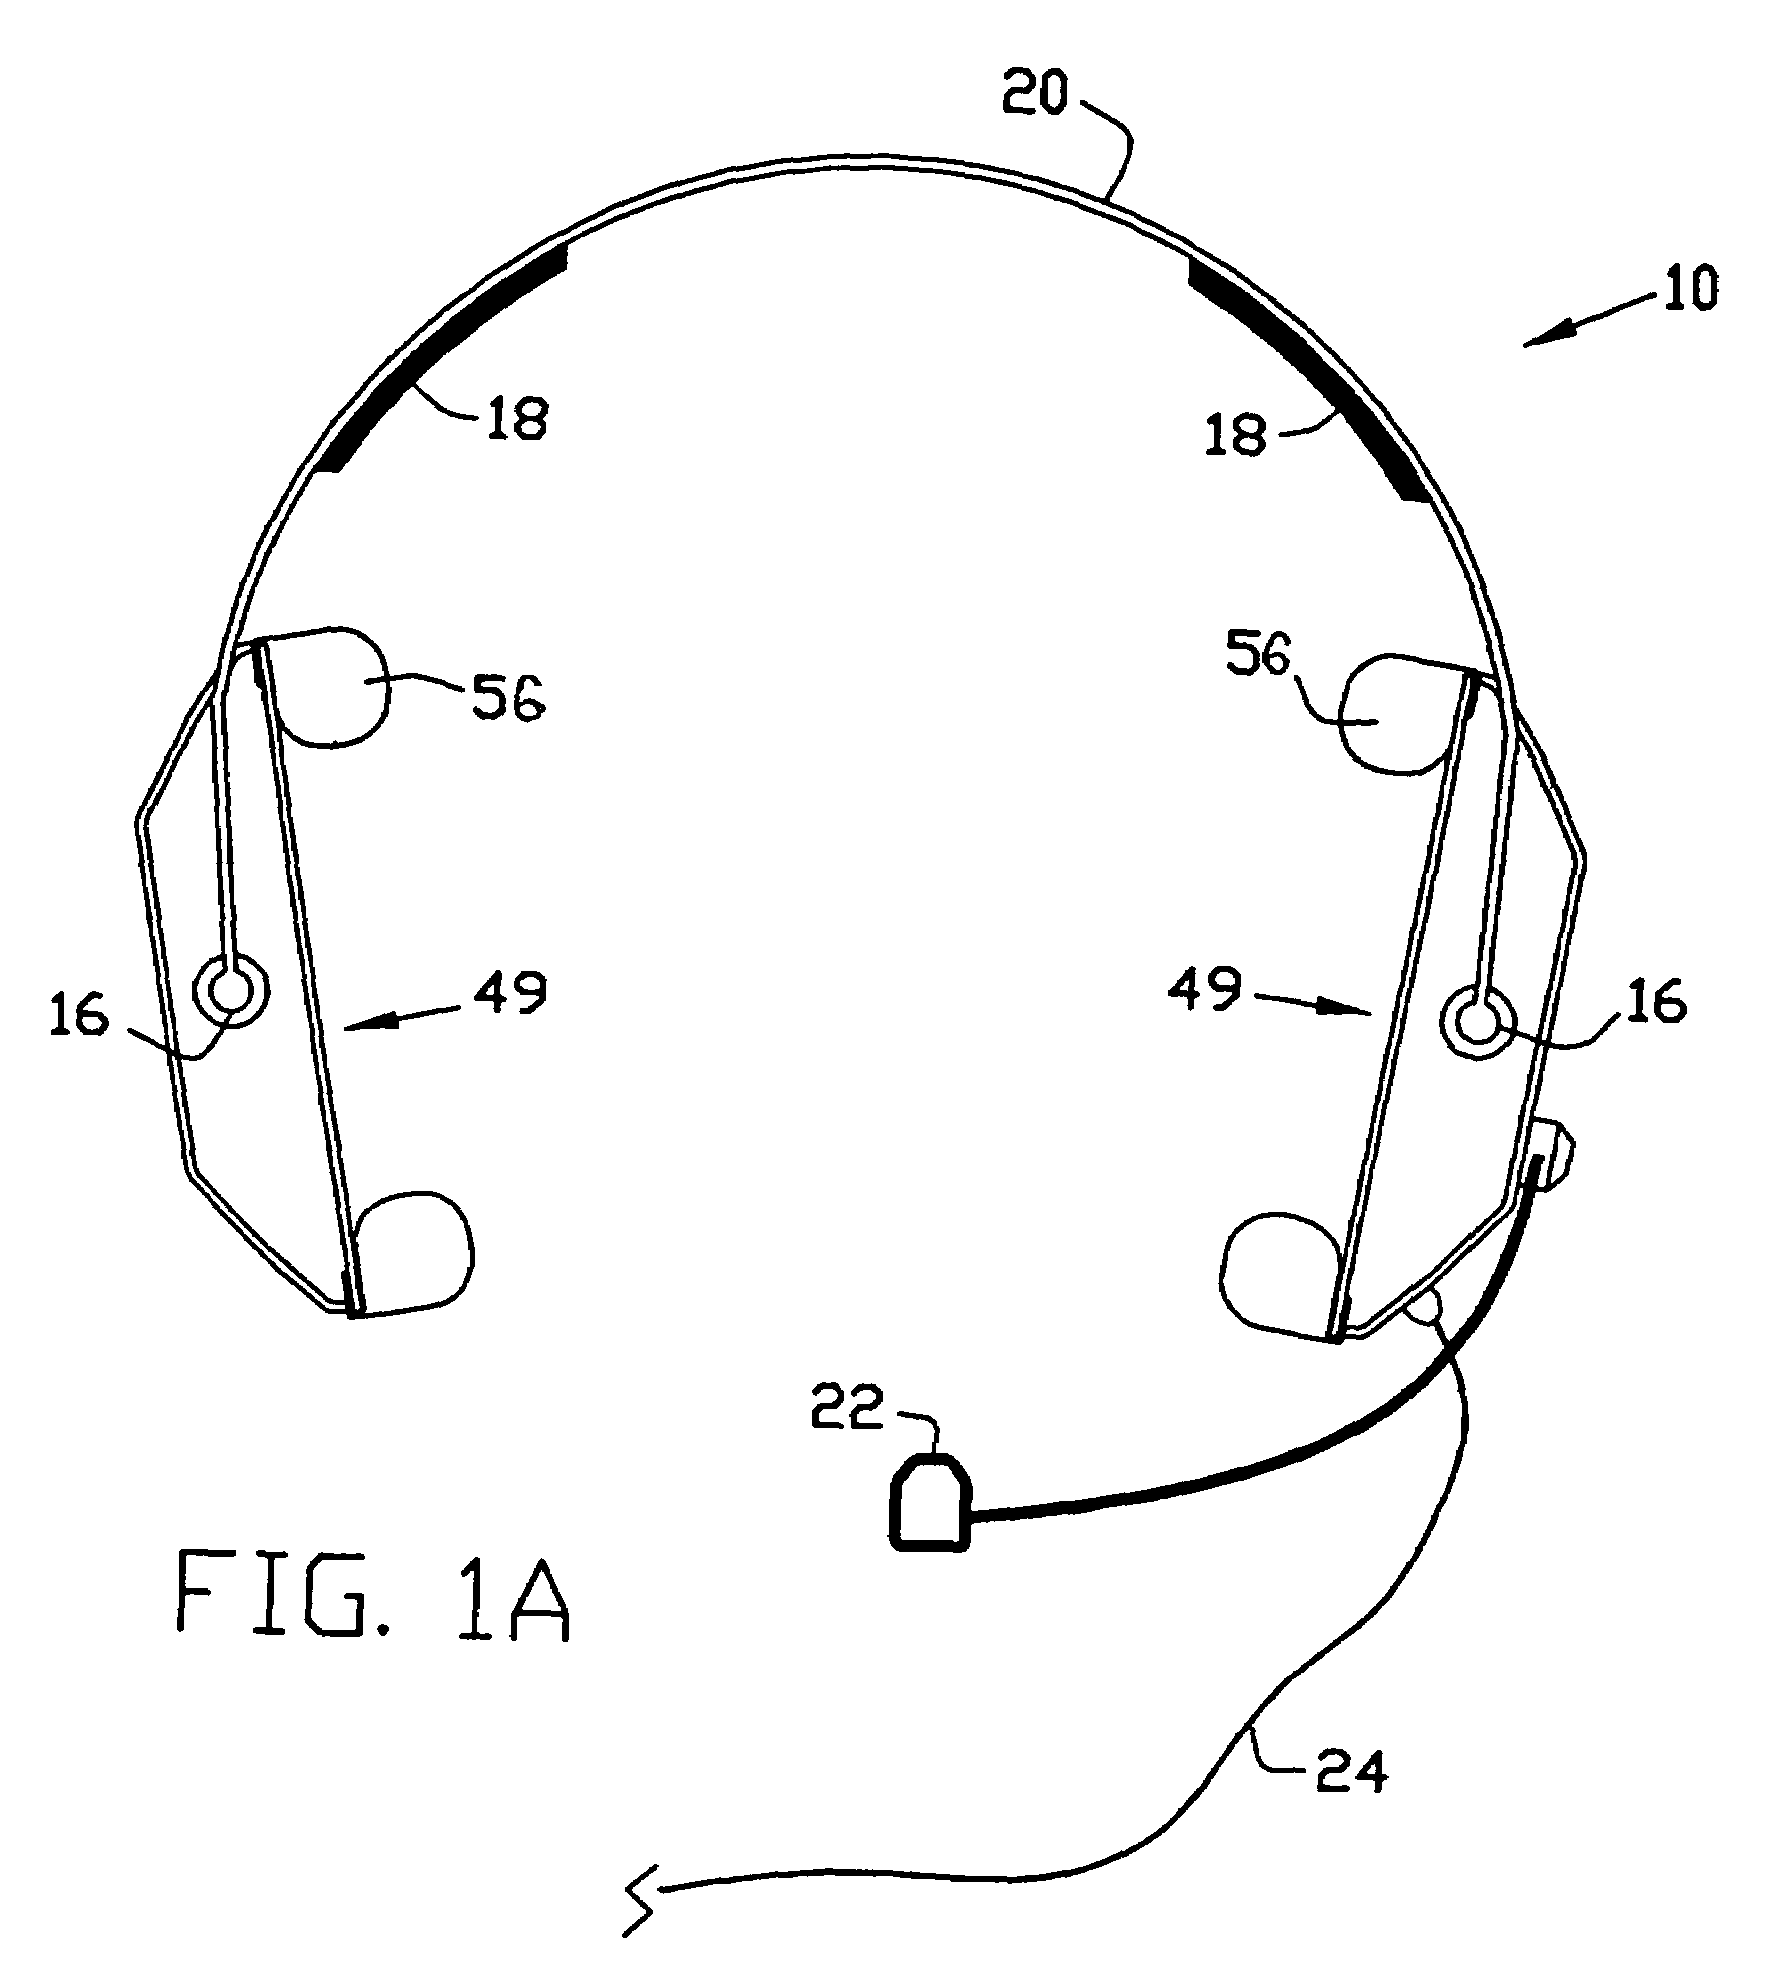 Electroacoustic devices with noise-reducing capability